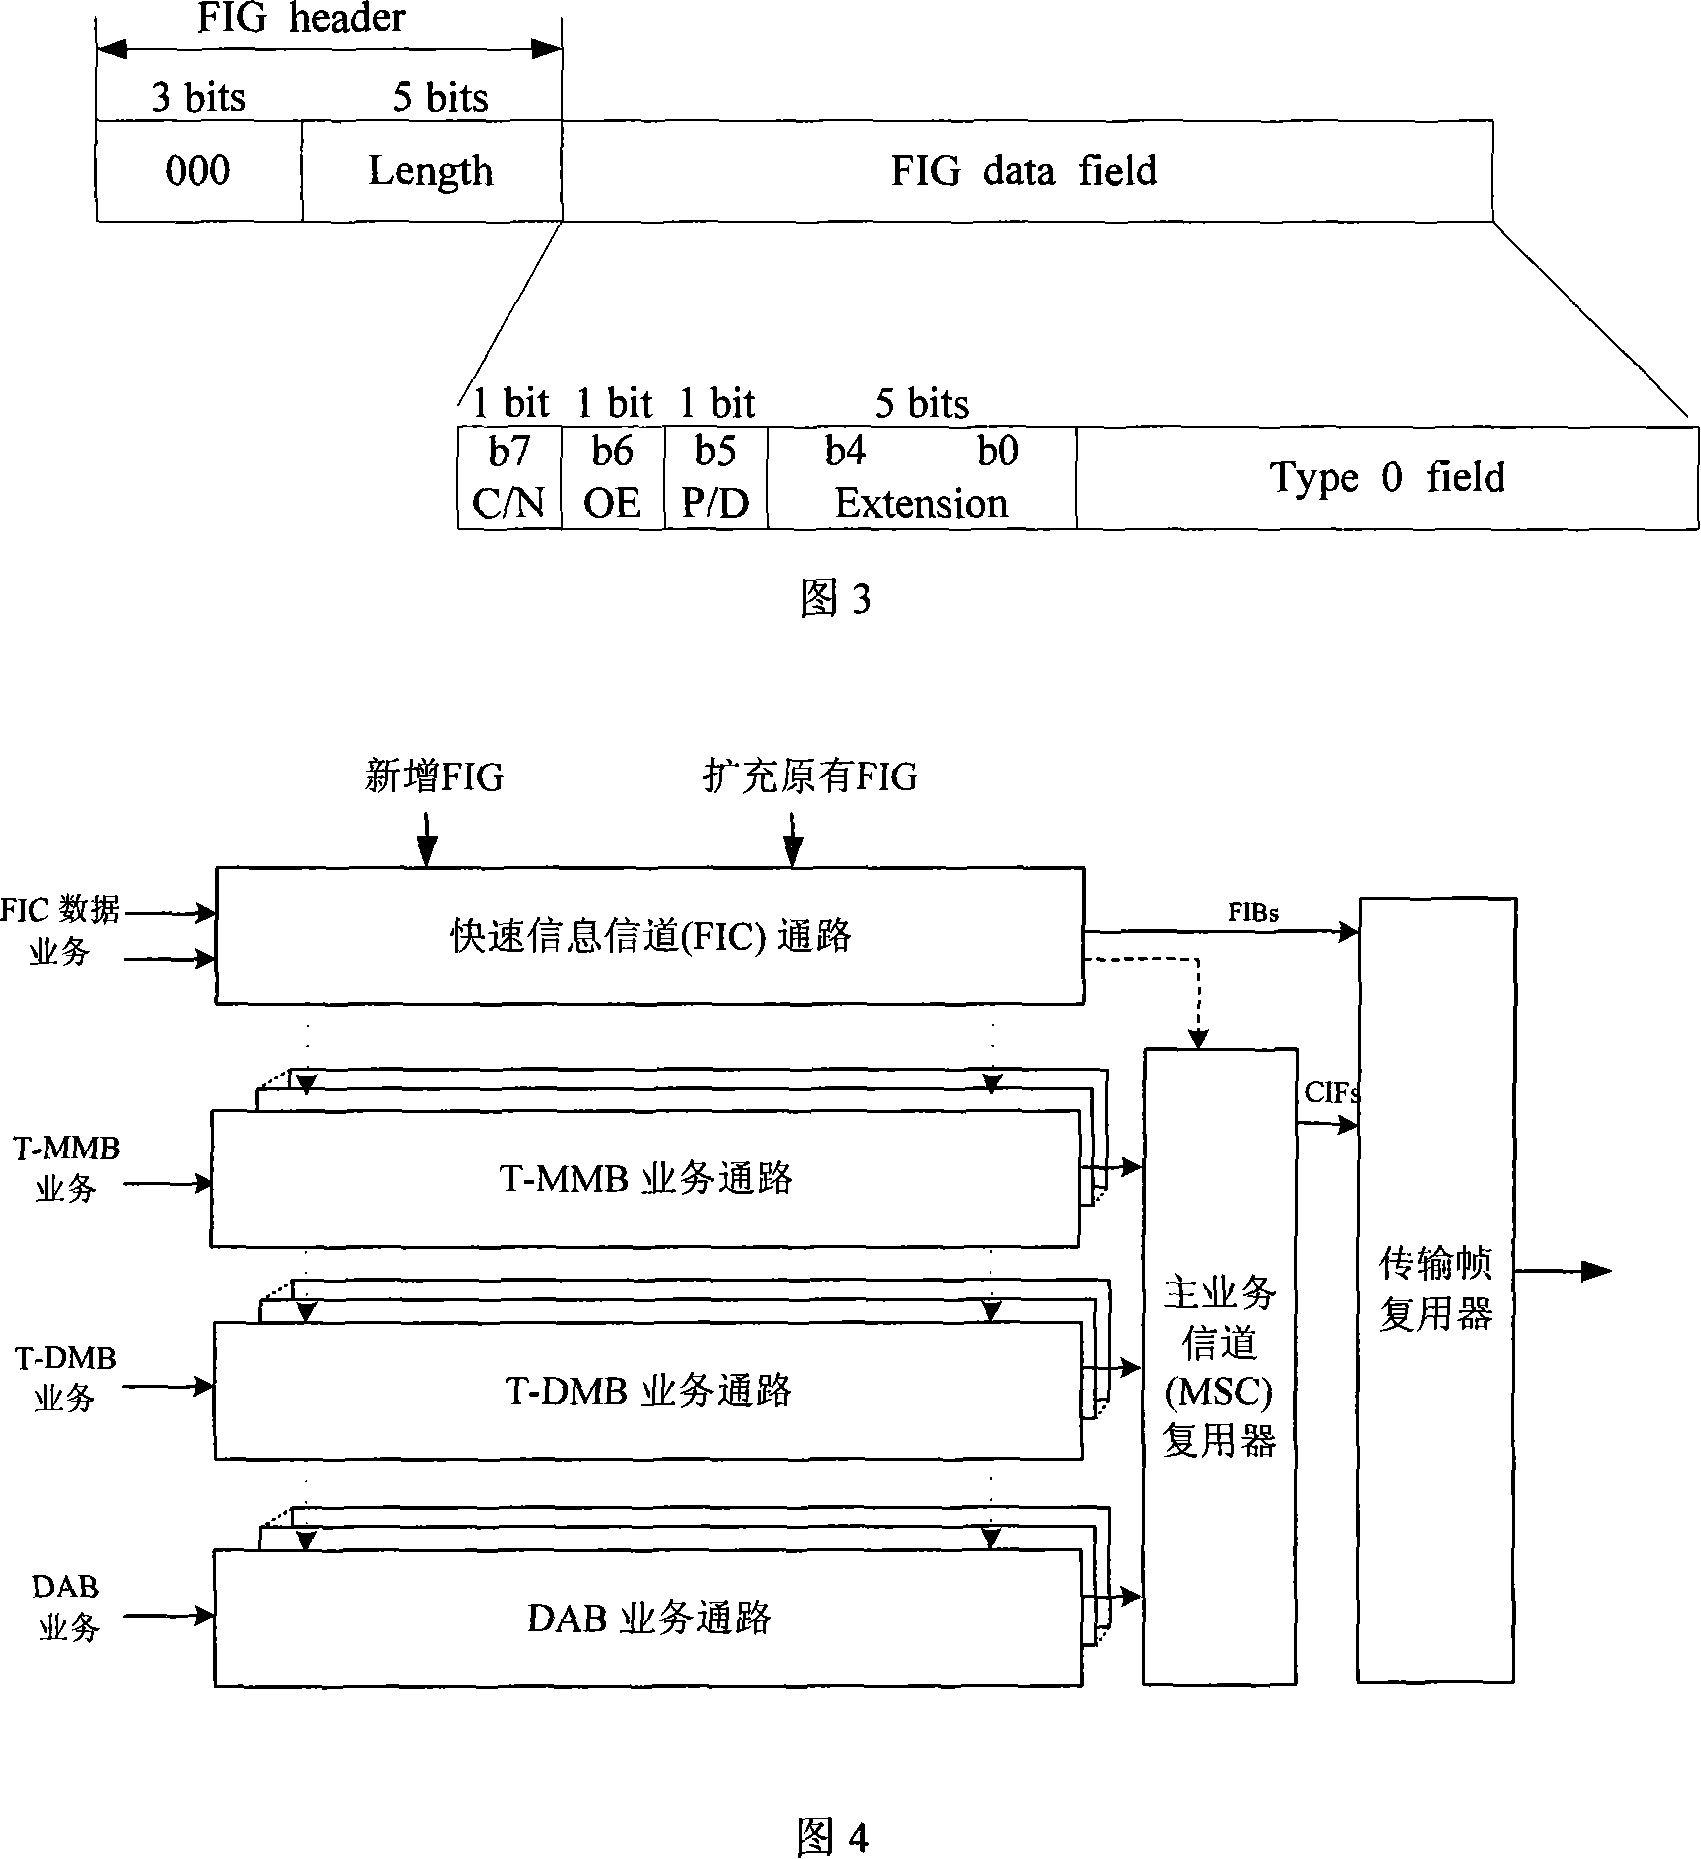 Design method for FIC new configuration in T-MMB system compatible with DAB